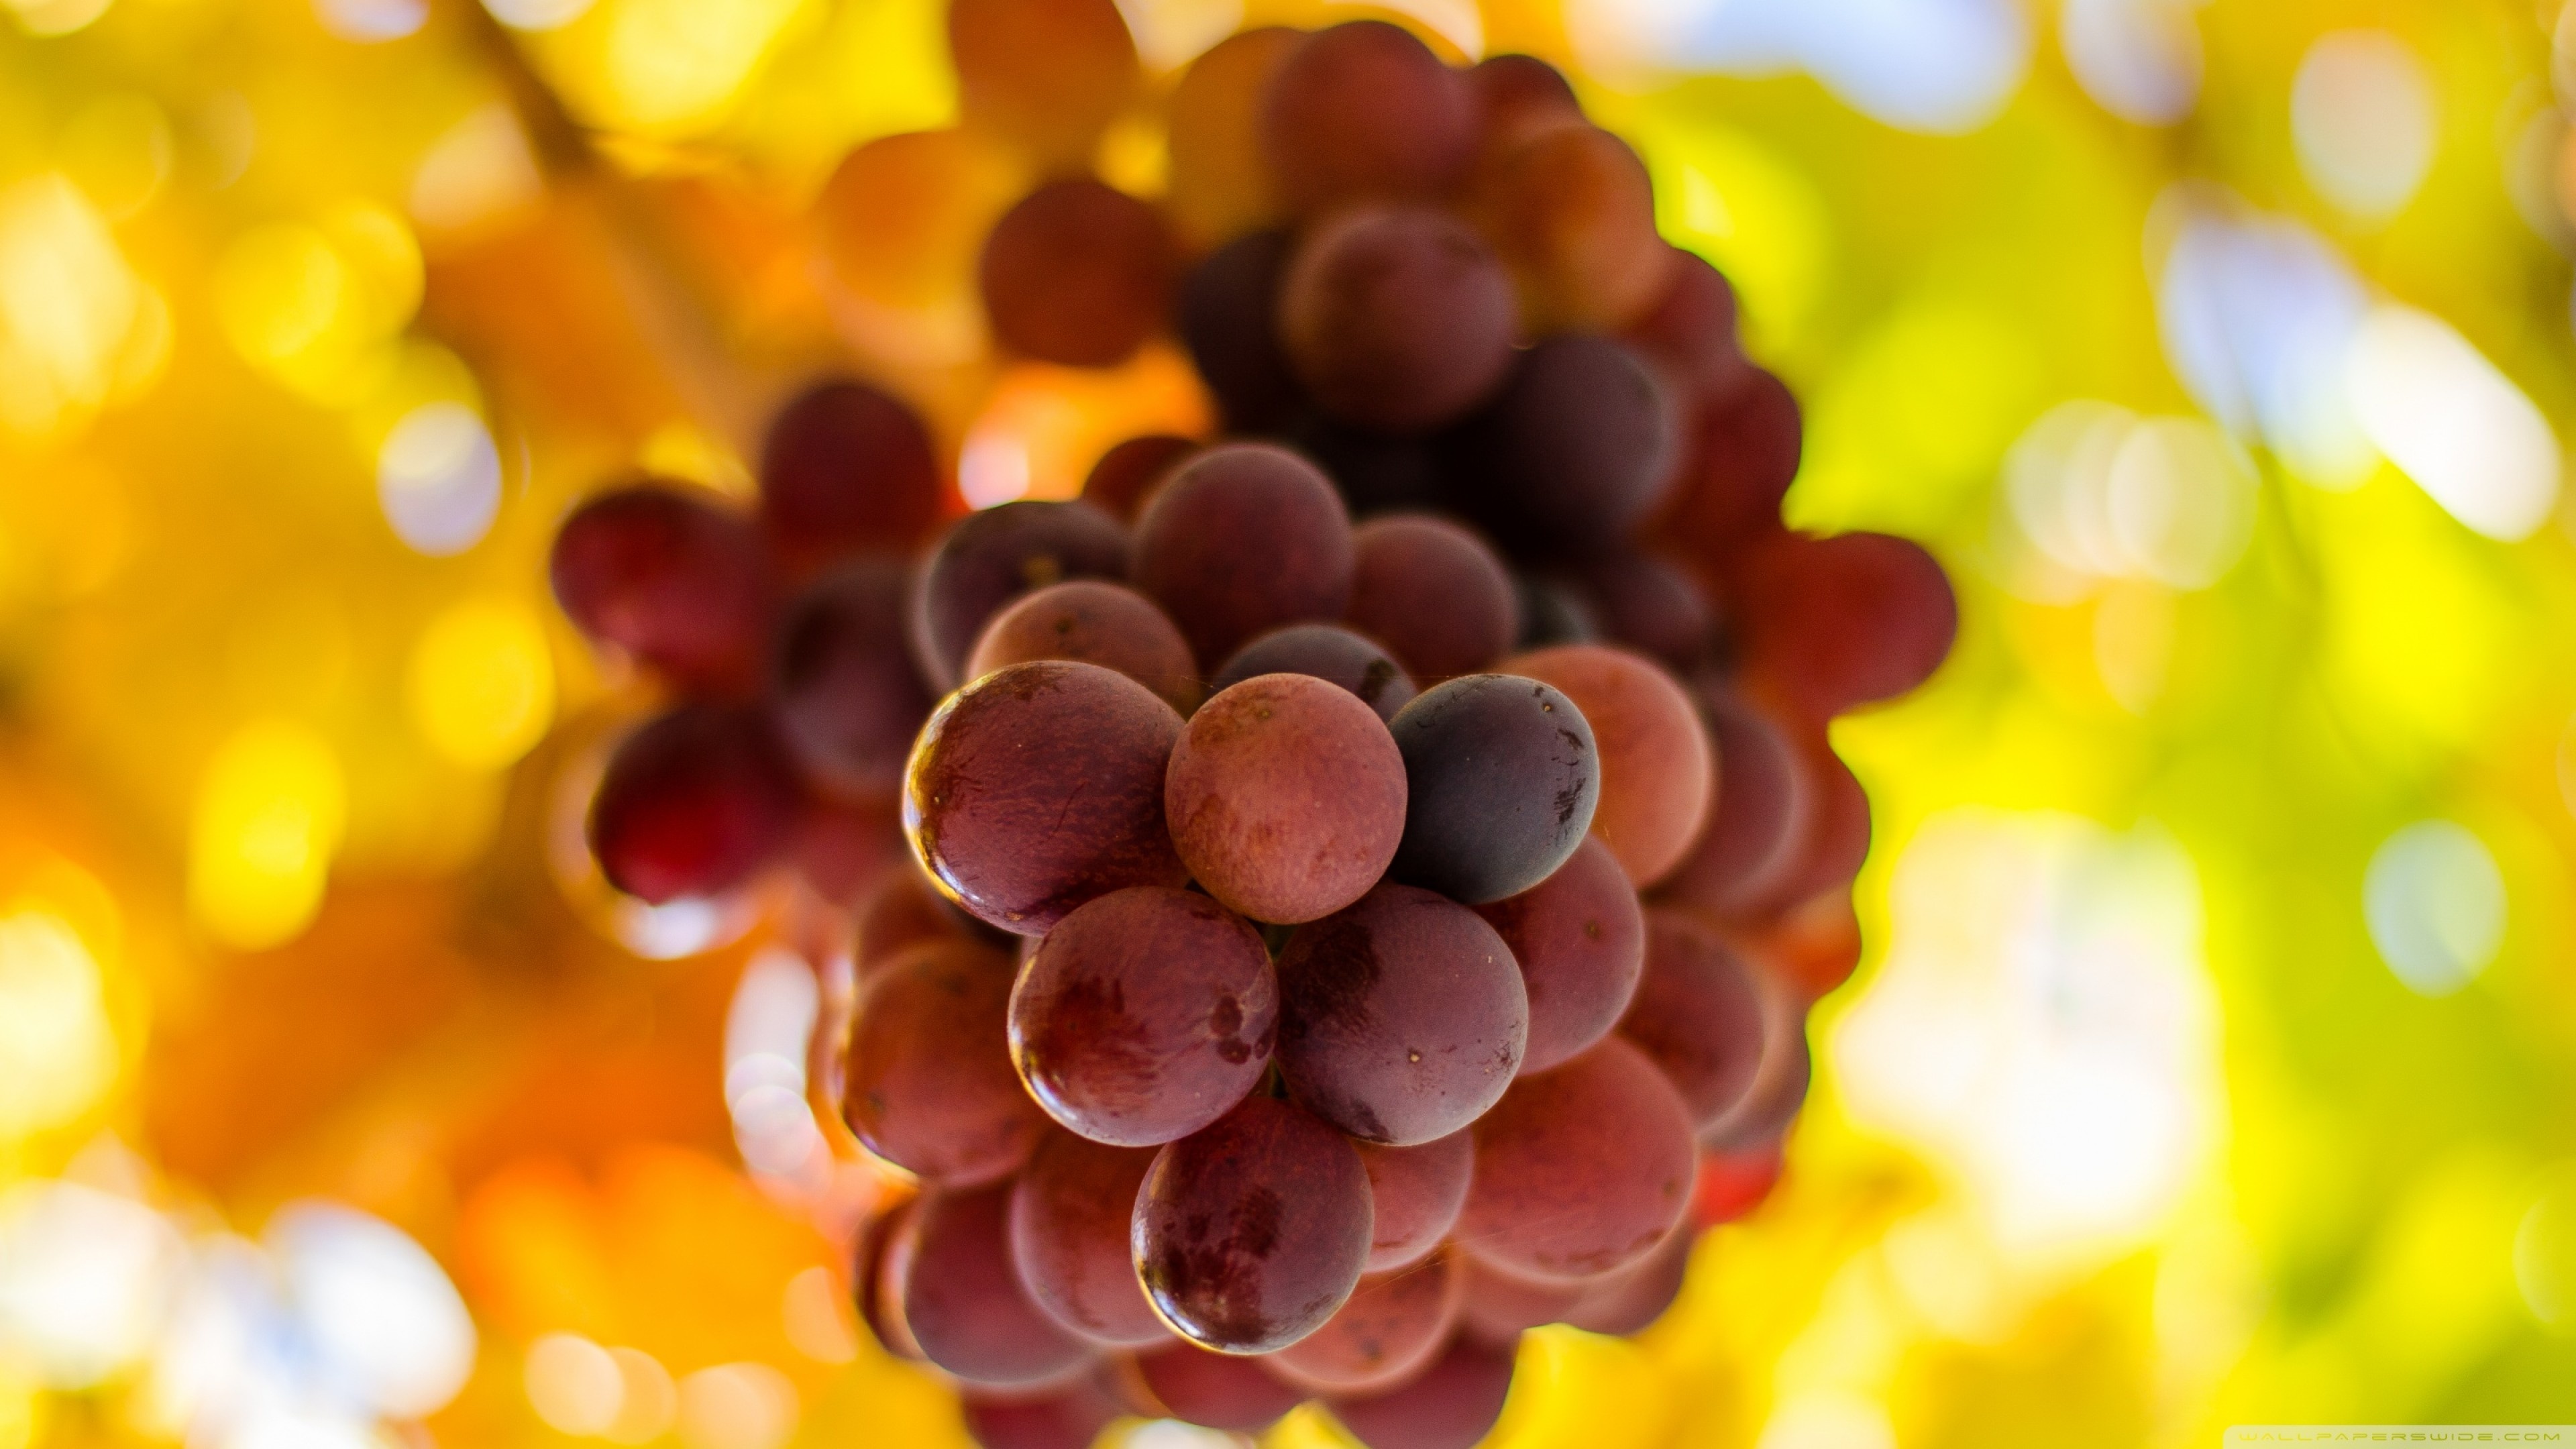 Grapes: Processed into a multitude of products such as jams, juices, kinds of vinegar, and oils. 3840x2160 4K Background.